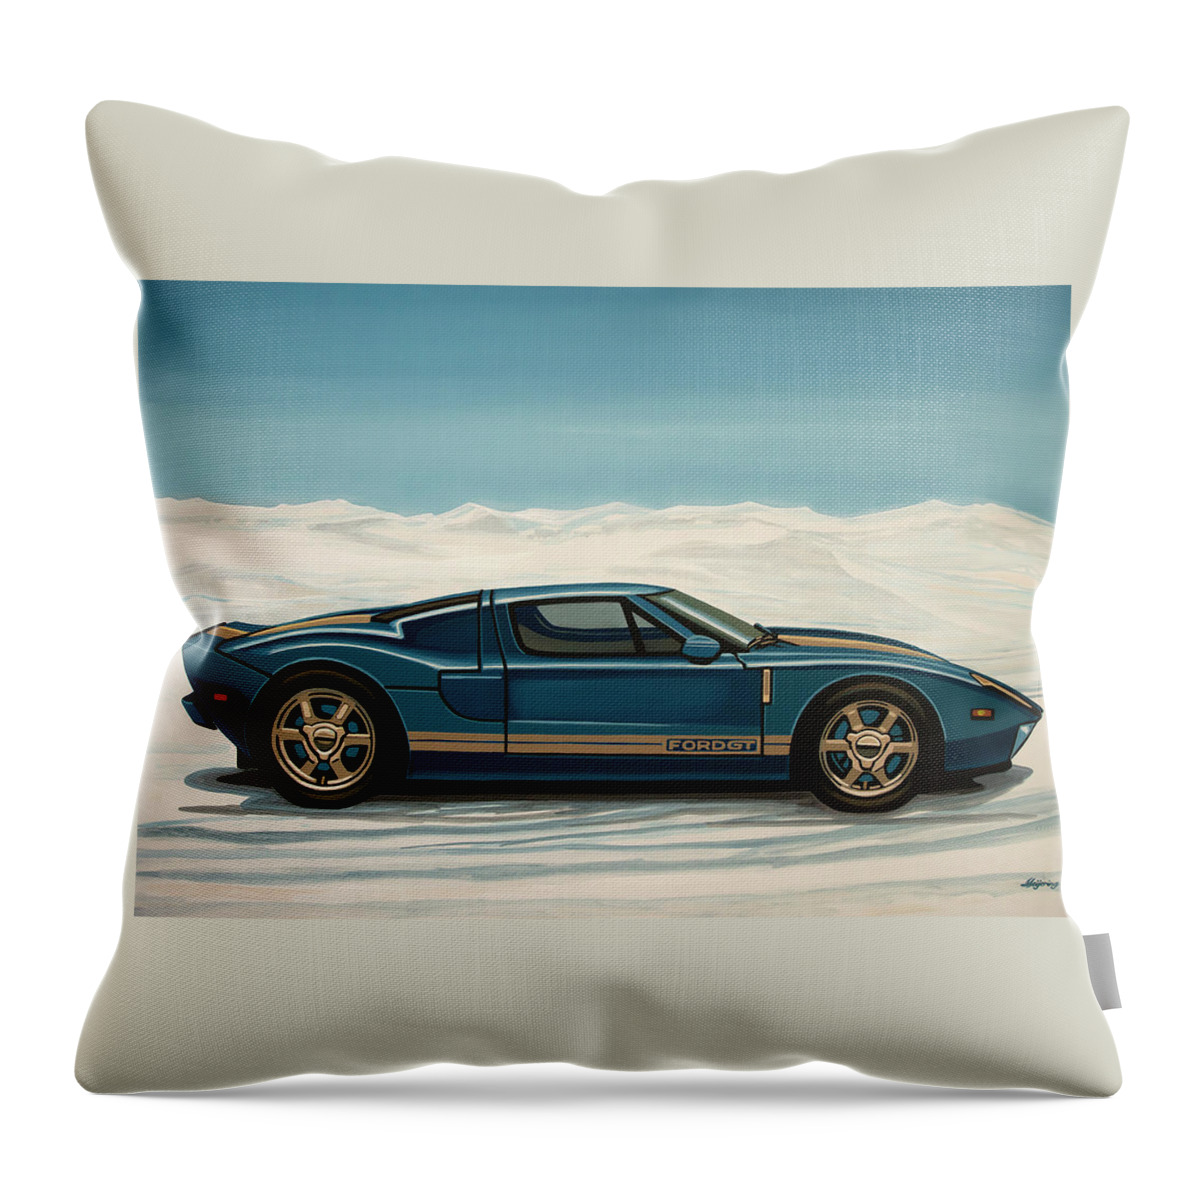 Ford Gt Throw Pillow featuring the painting Ford GT 2005 Painting by Paul Meijering